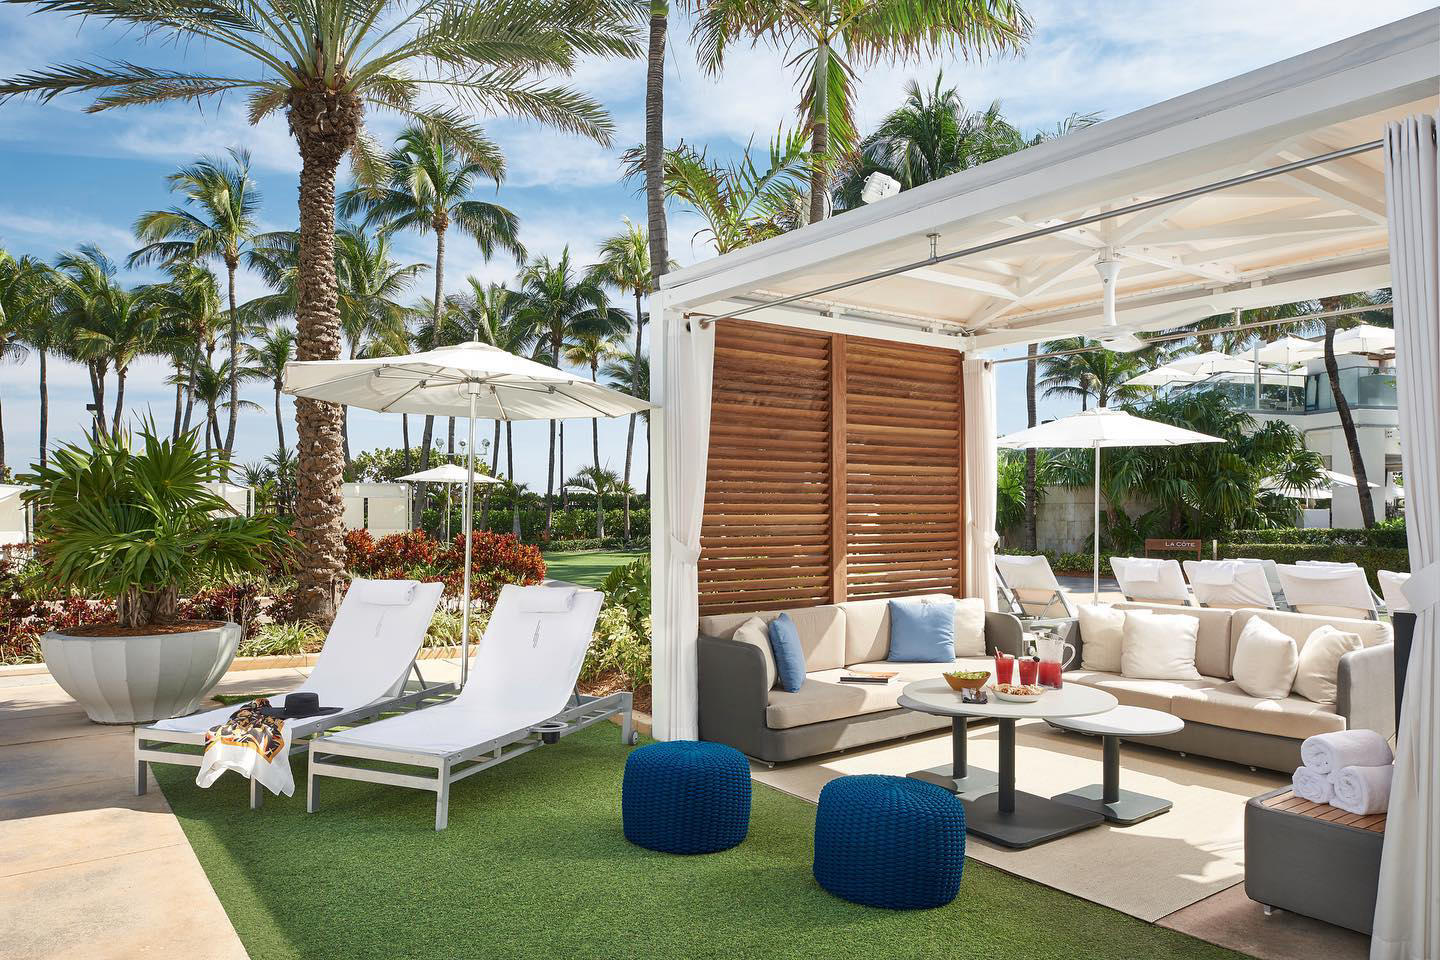 image  1 Fontainebleau is thrilled to announce cabana daypass packages to non-hotel guests, available Monday